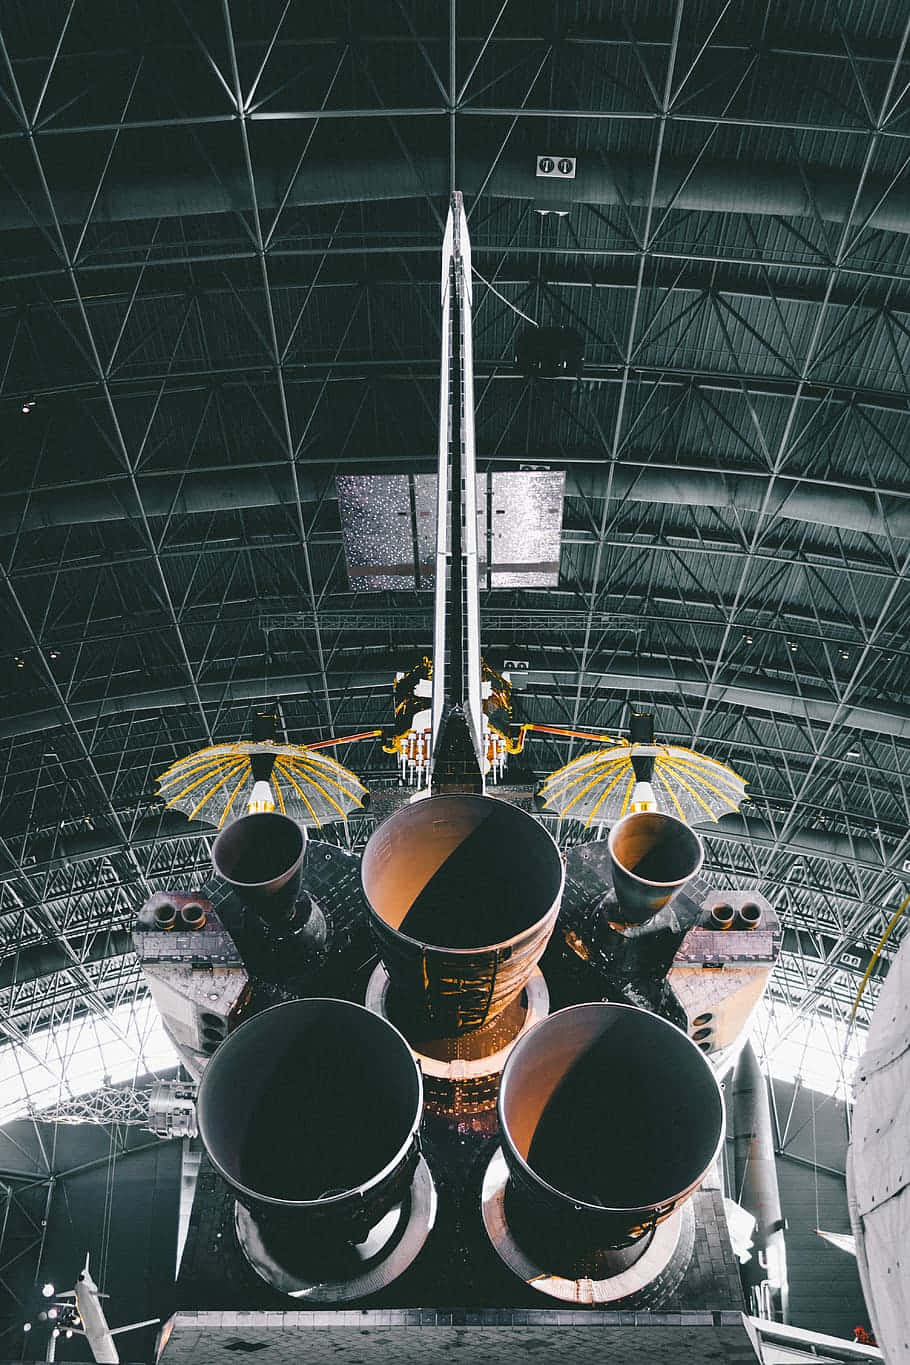 A Large Spacecraft Is Sitting In A Hangar